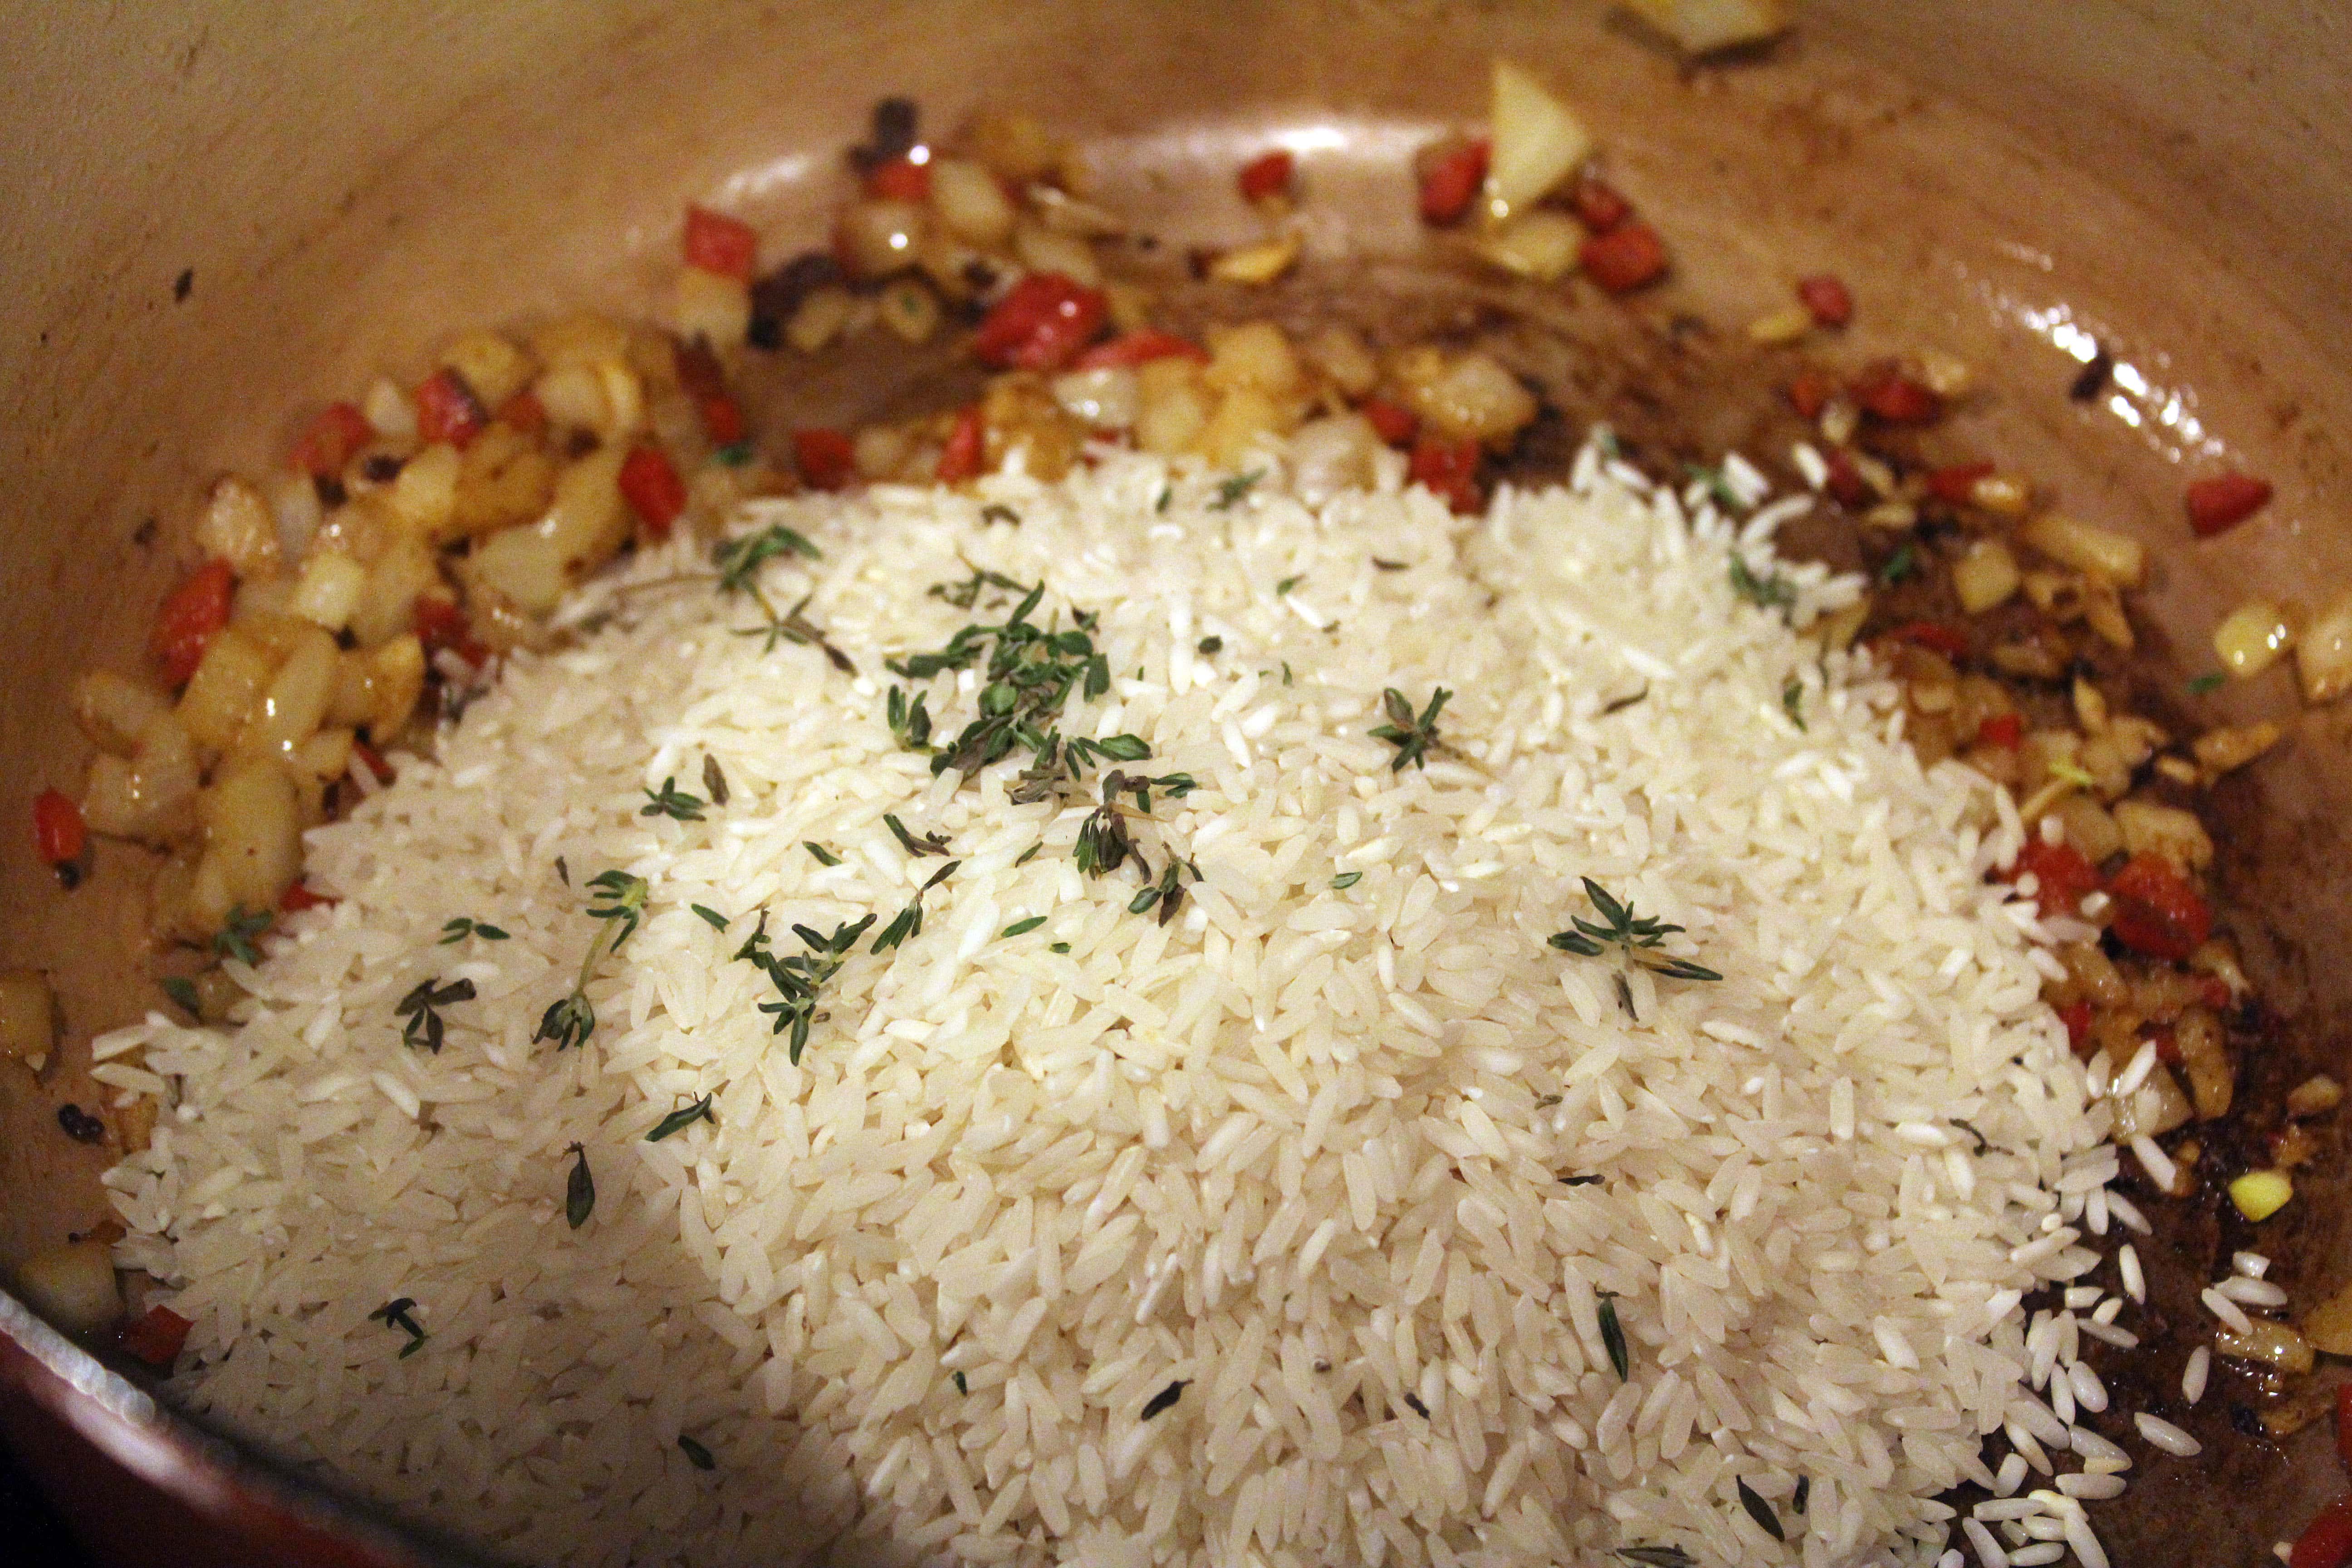 Stir rice and thyme into oil